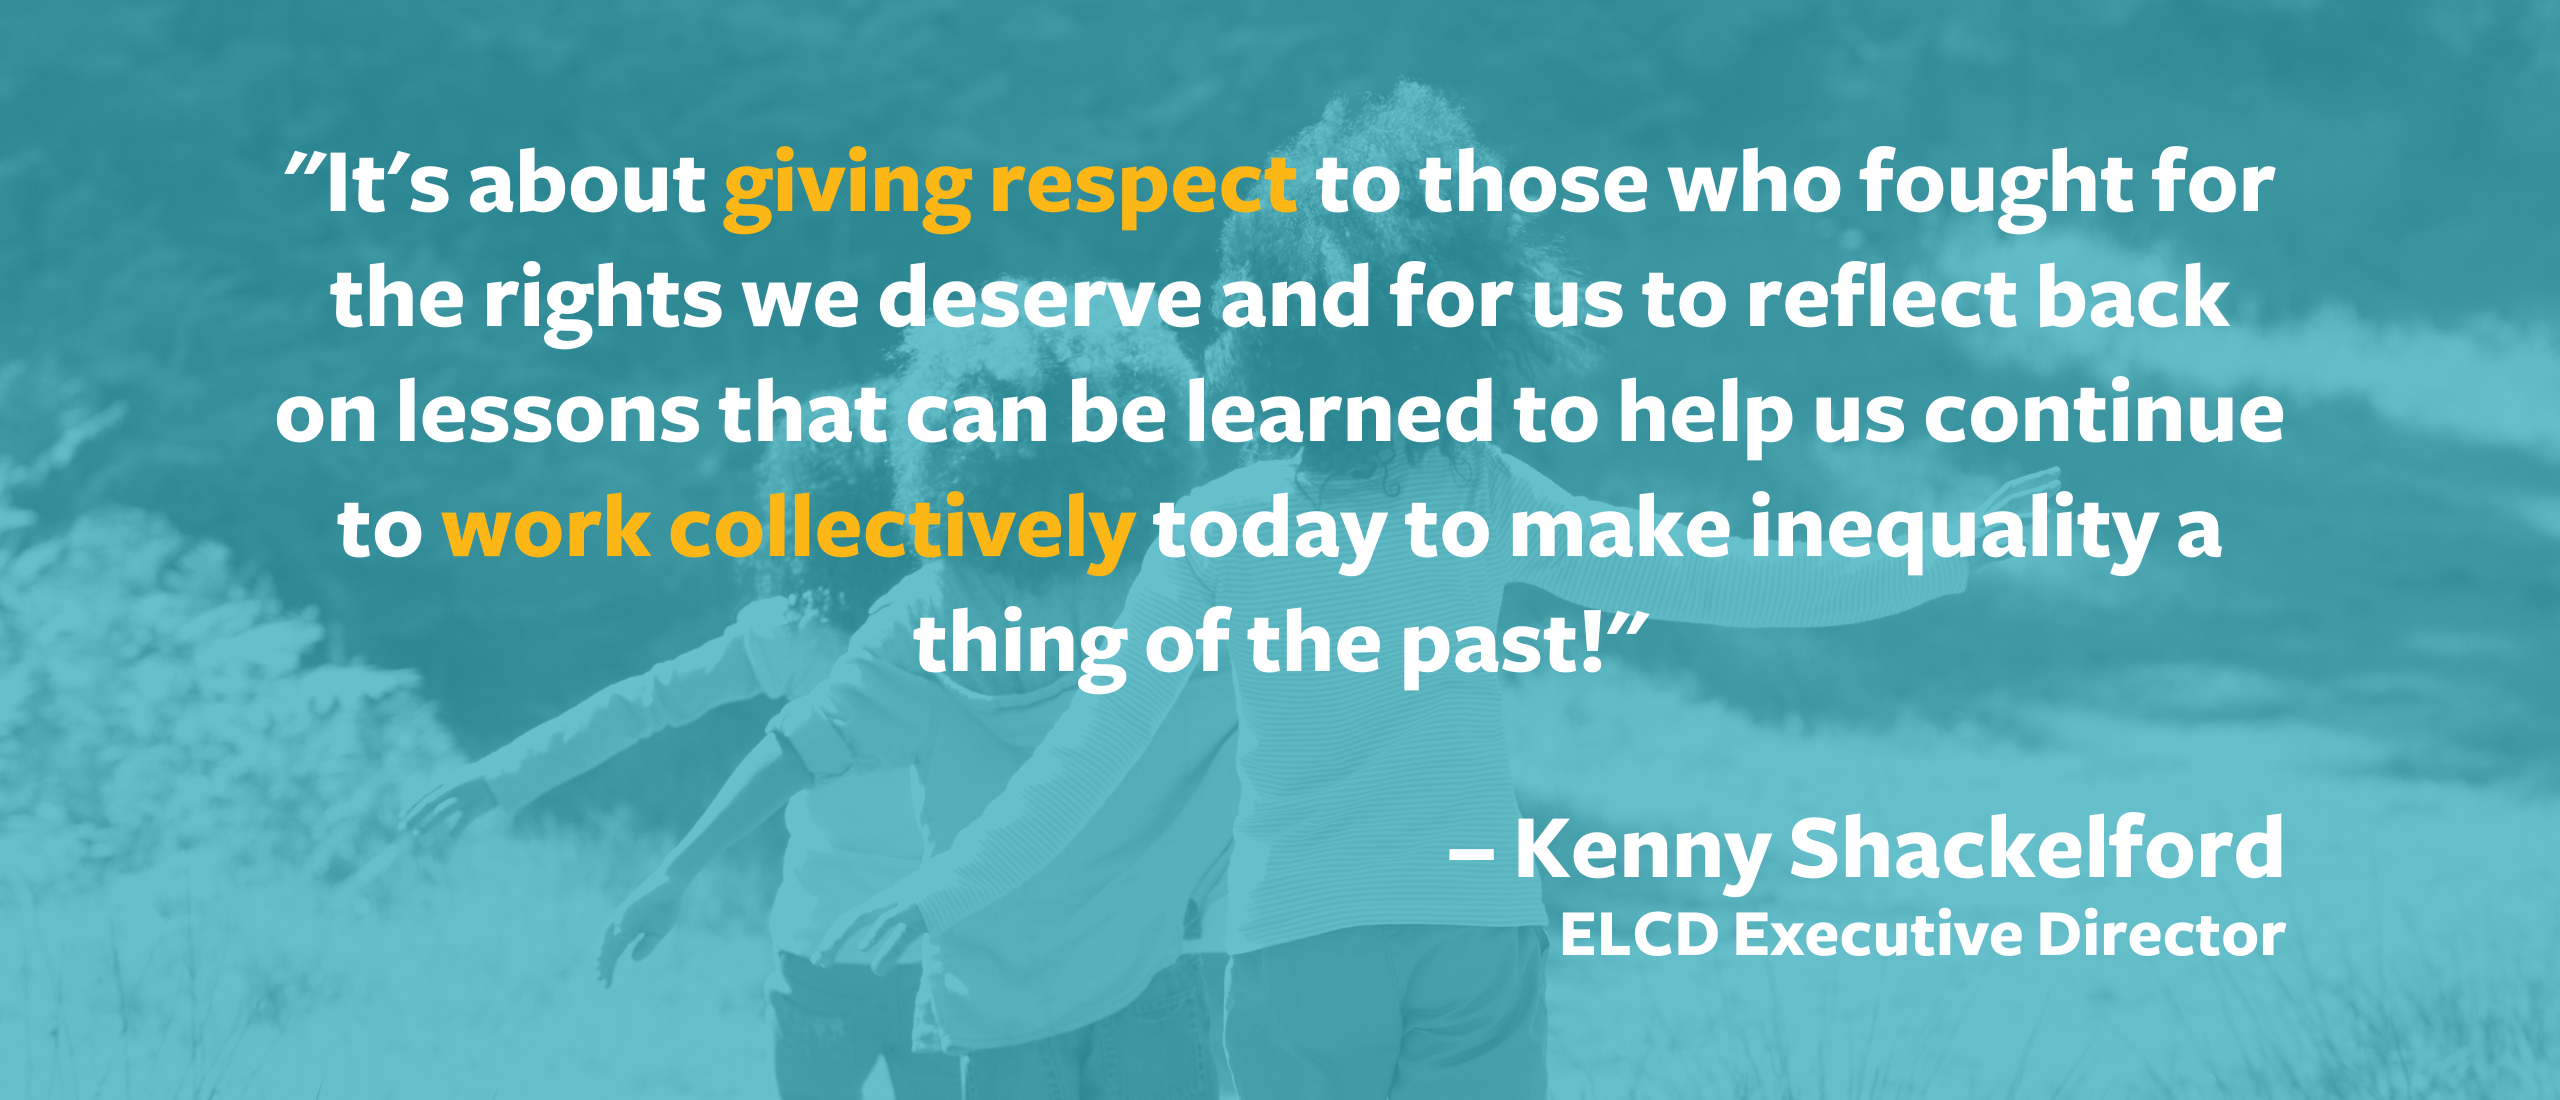 Black Excellence in Leadership: A Conversation with ELCD Executive Director, Kenny Shackelford